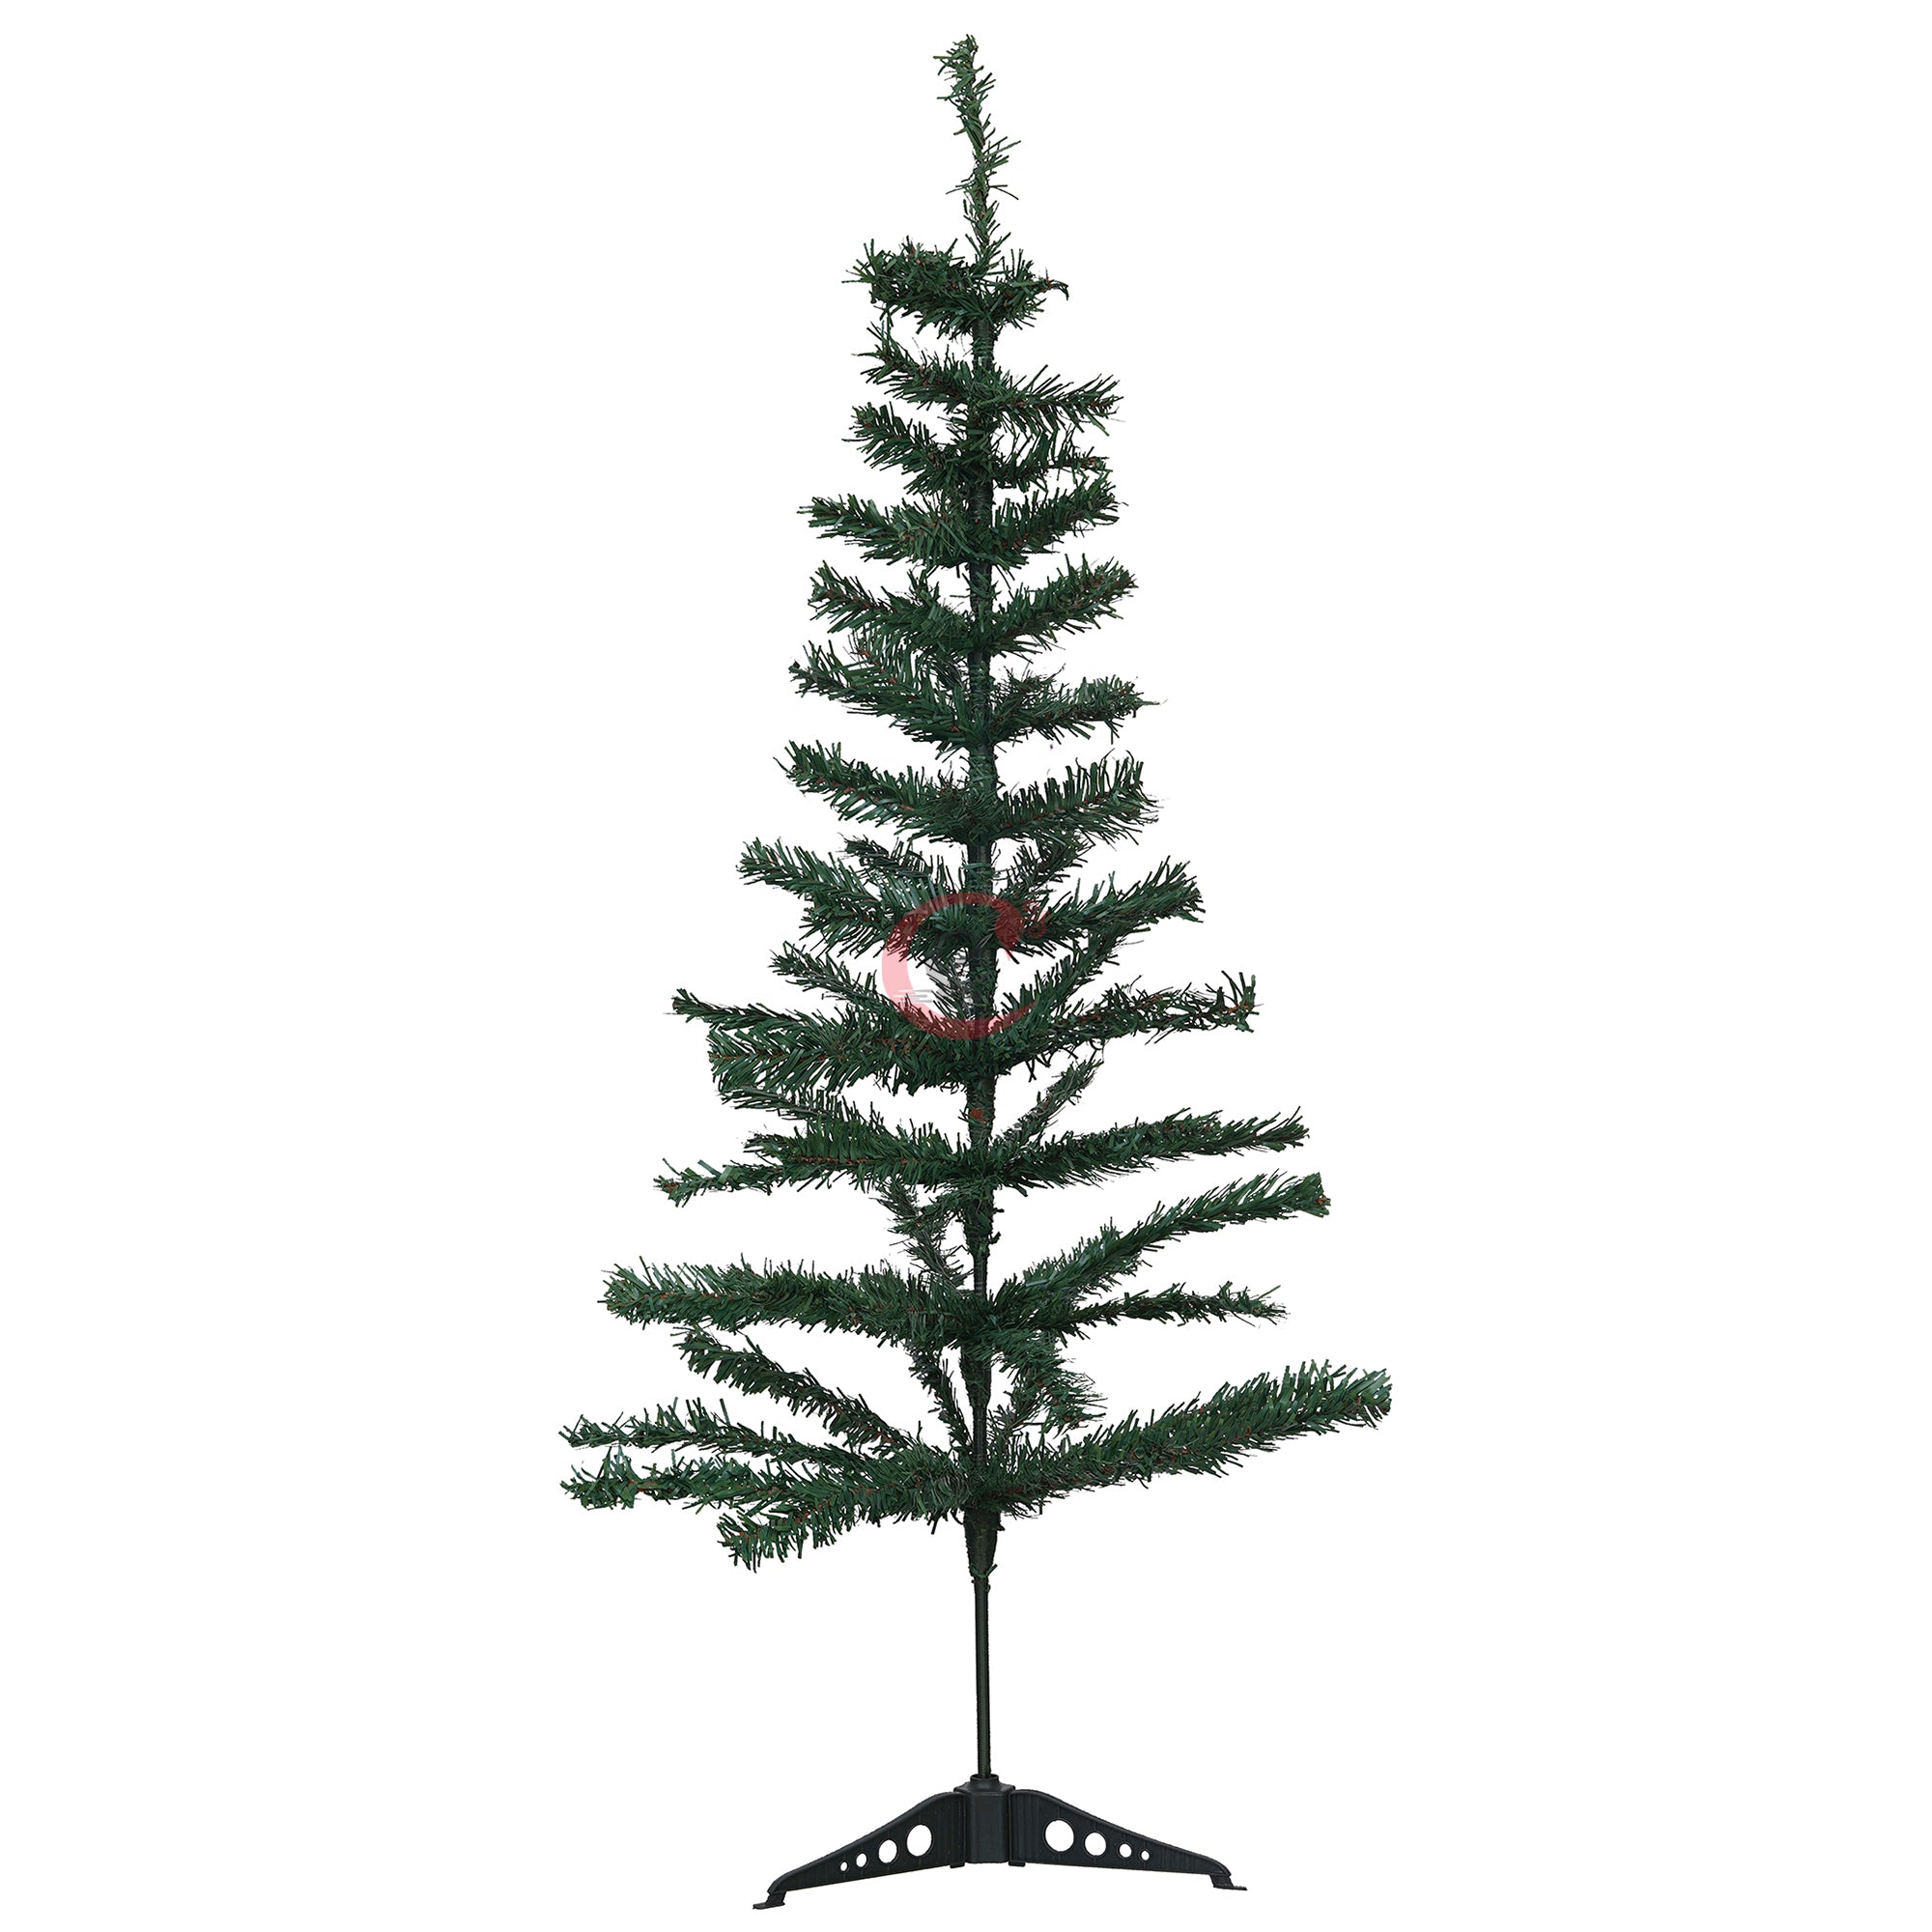 eCraftIndia 4 Feet Green Artificial Christmas Tree Xmas Pine Tree with Stand and 60 Christmas Decoration Ornaments Props - Merry Christmas Decoration Item for Home, Office, and Church 8